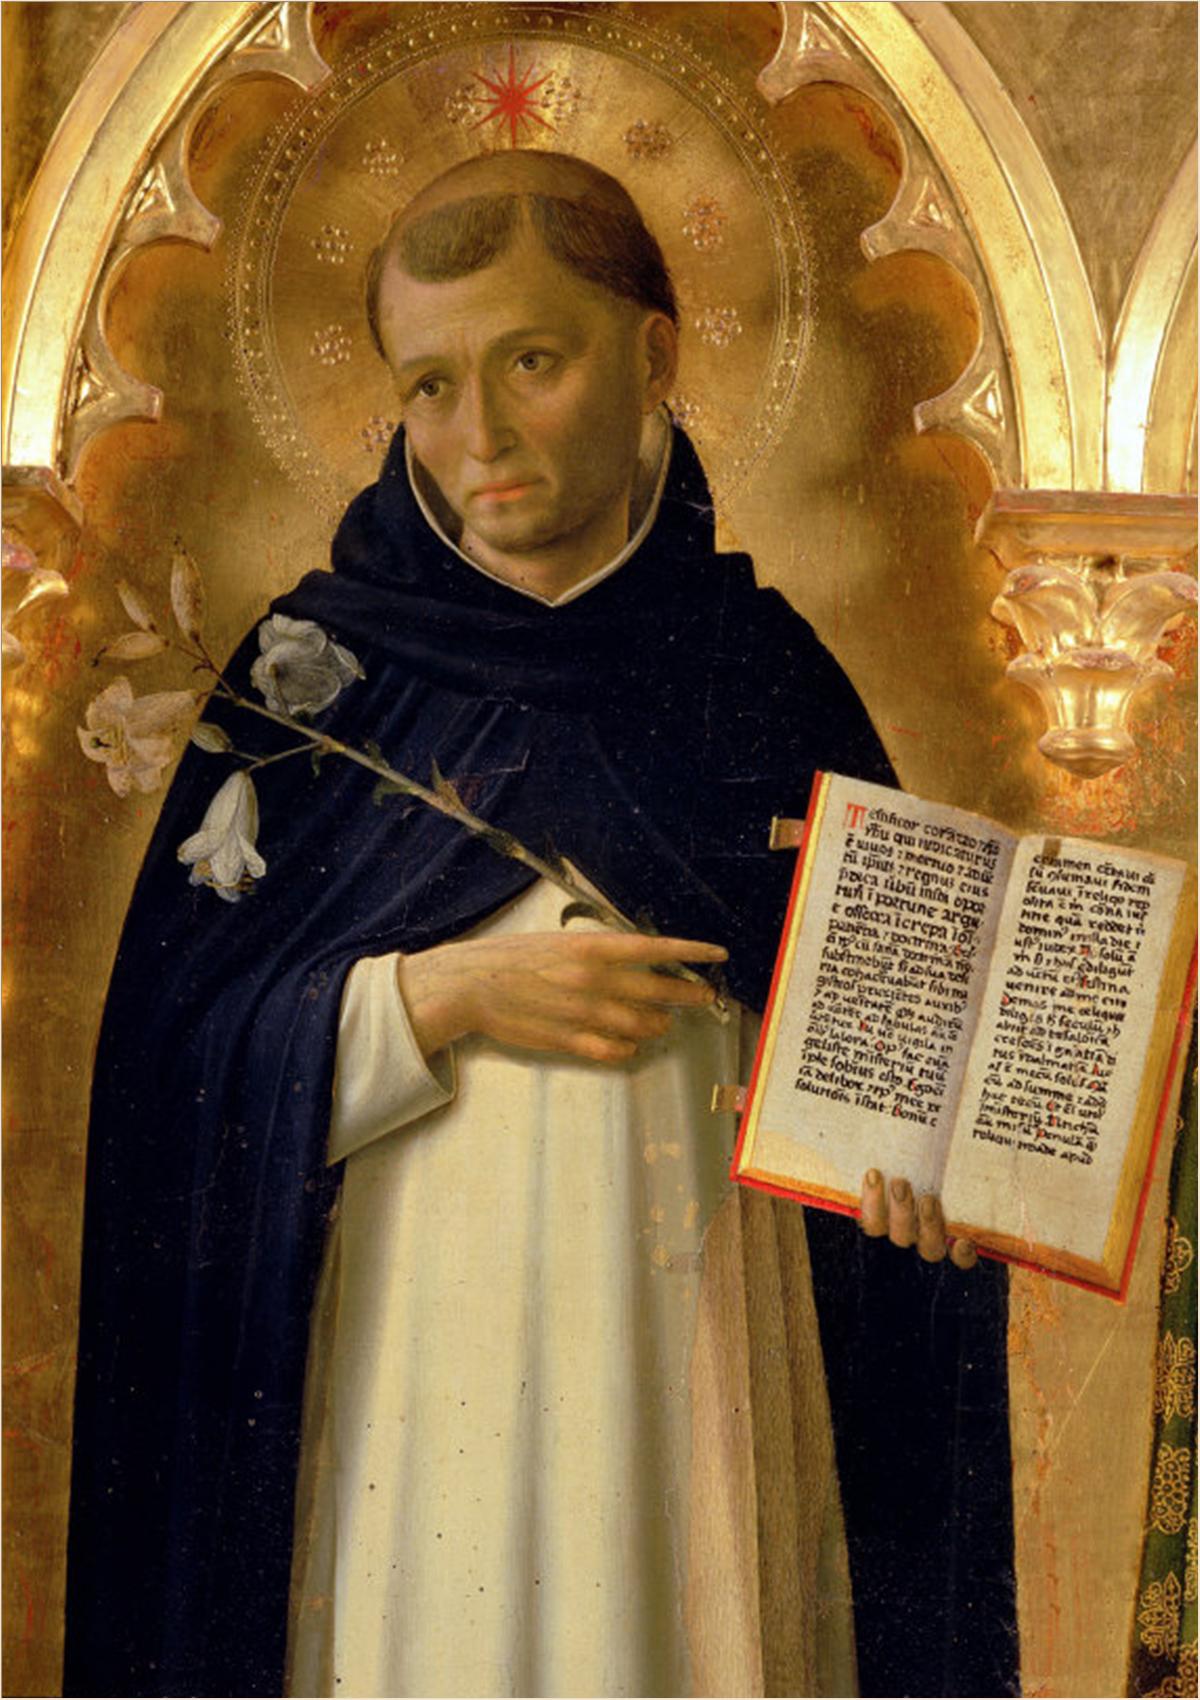 Featured image for “St. Dominic and the Origins of the Rosary”